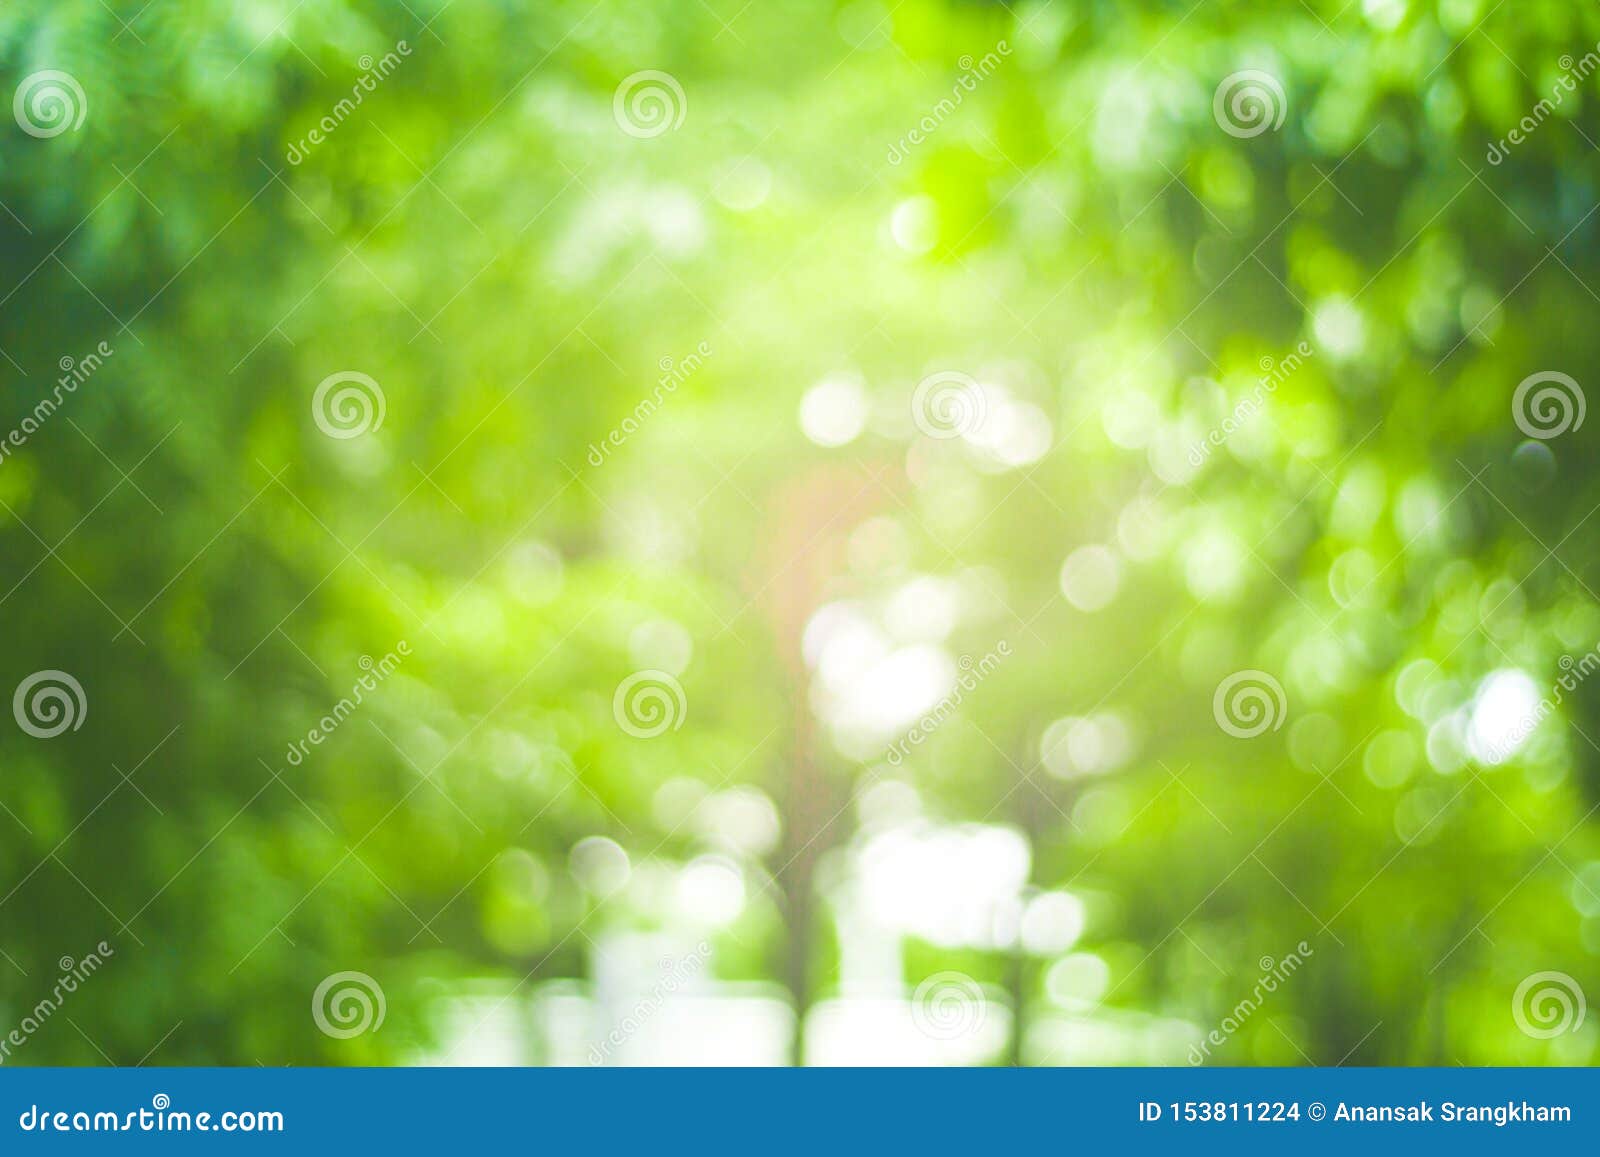 Abstract Green Nature Blur Background and Sunlight Stock Photo - Image of  season, space: 153811224